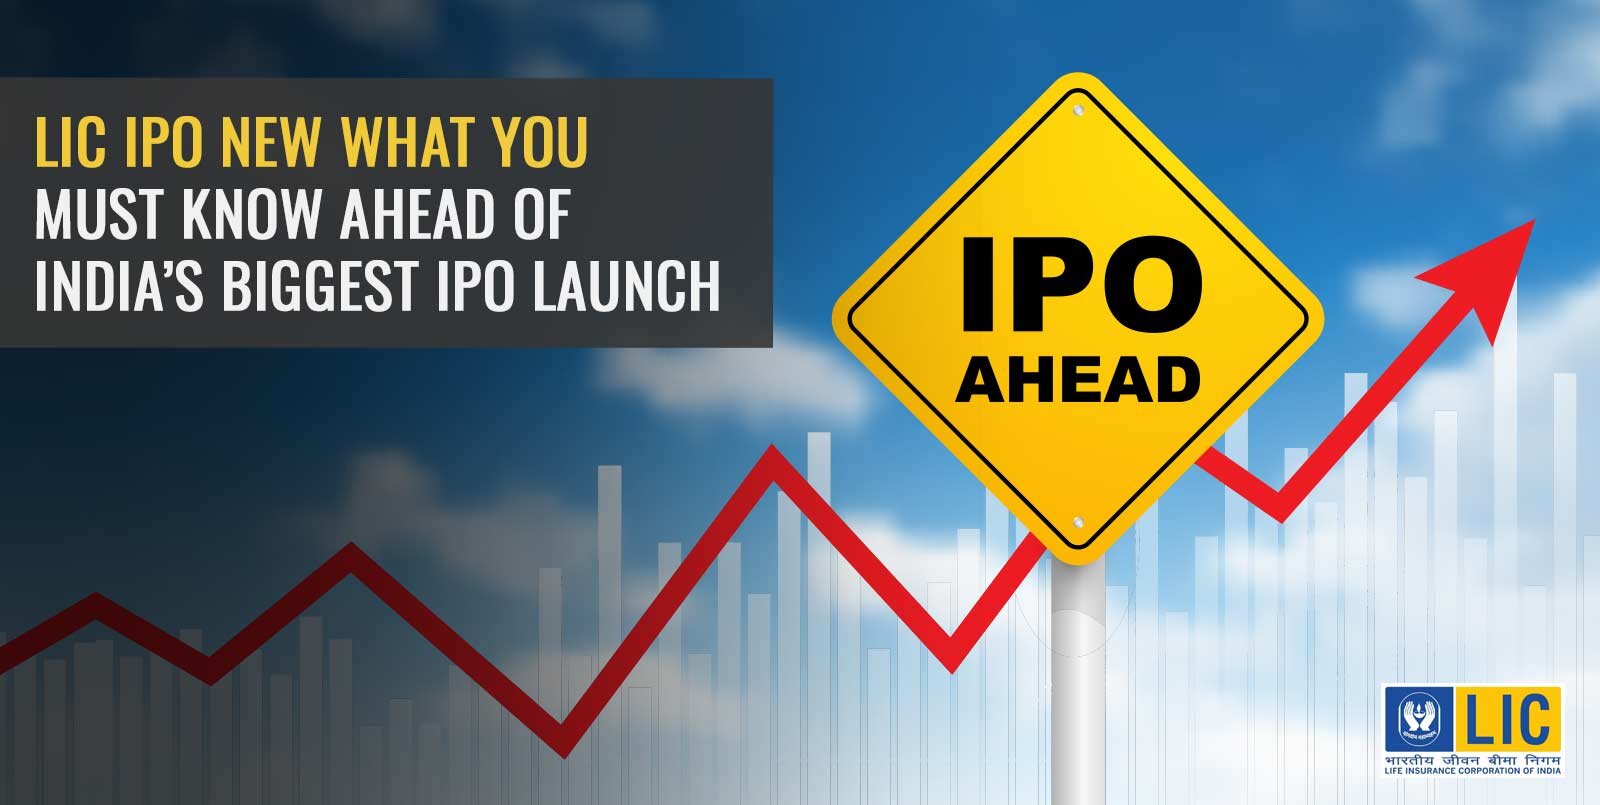 LIC IPO - What you must know about the largest IPO in Indian history